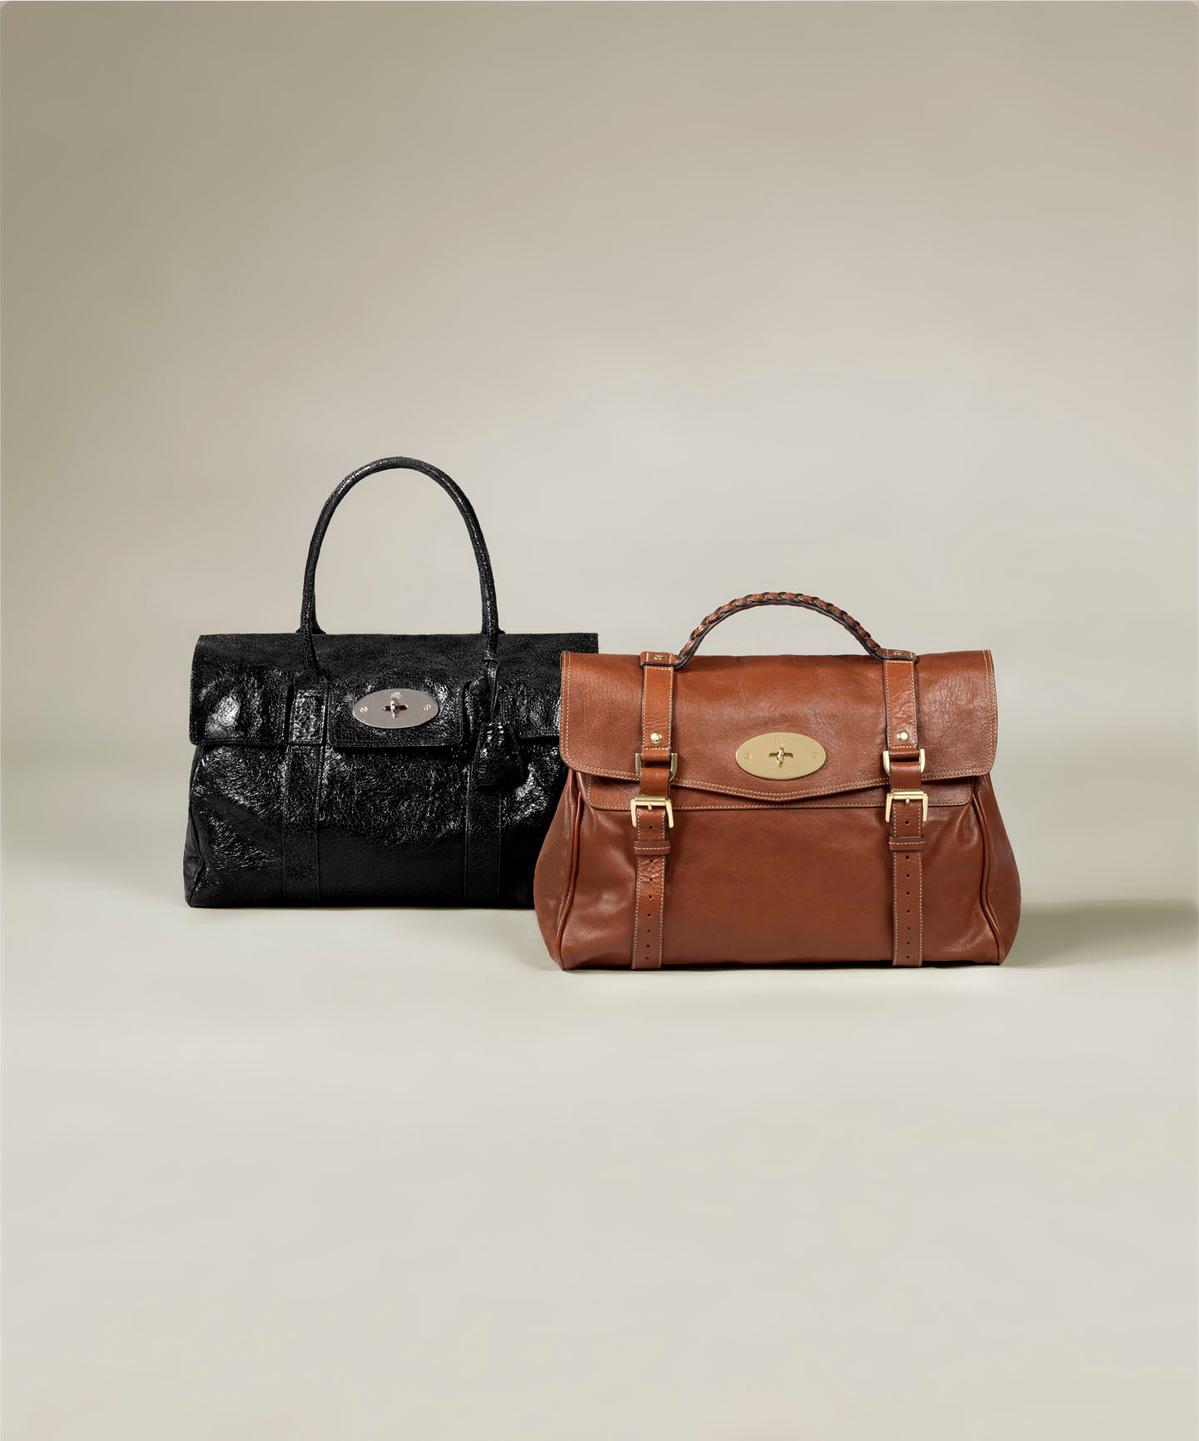 Mulberry Alexa and Bayswater owned by Kate Moss and Alexa Chung